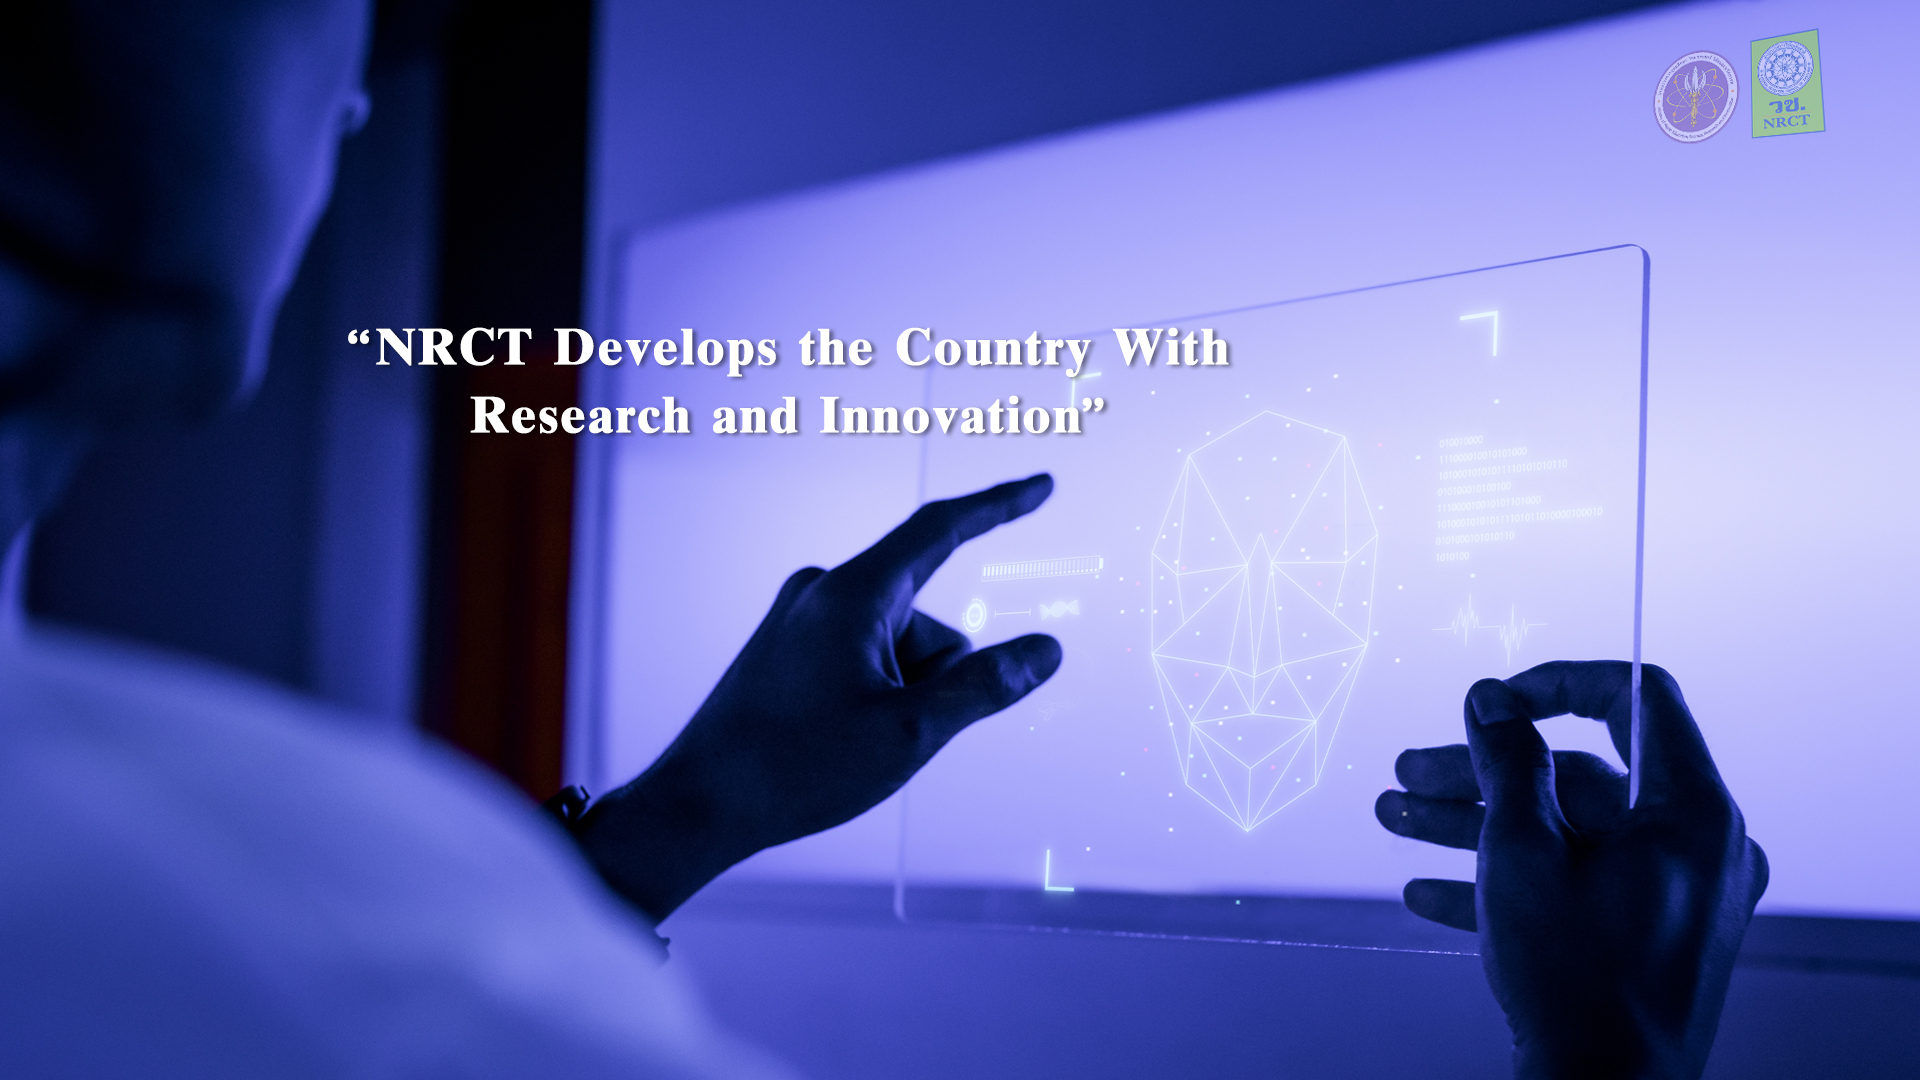 NRCT develops the country with research and innovation